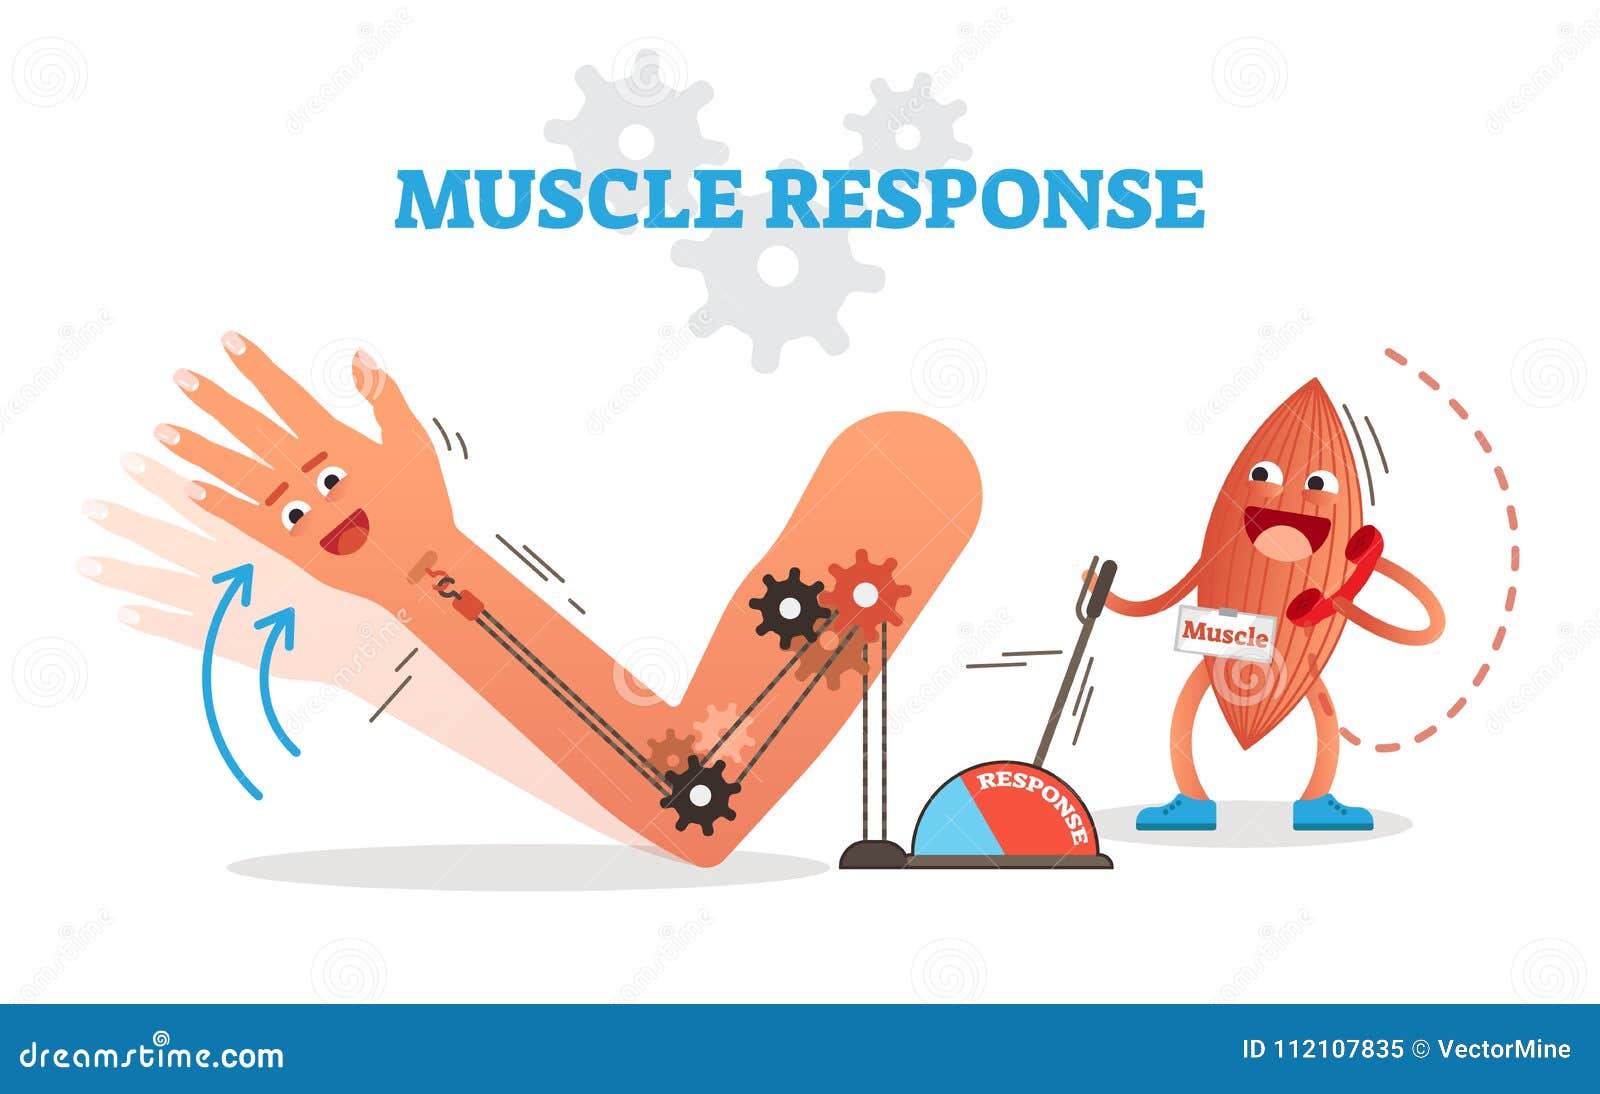 muscle response conceptual   scheme with cartoon muscle character receiving nerve impulse and moving hand.